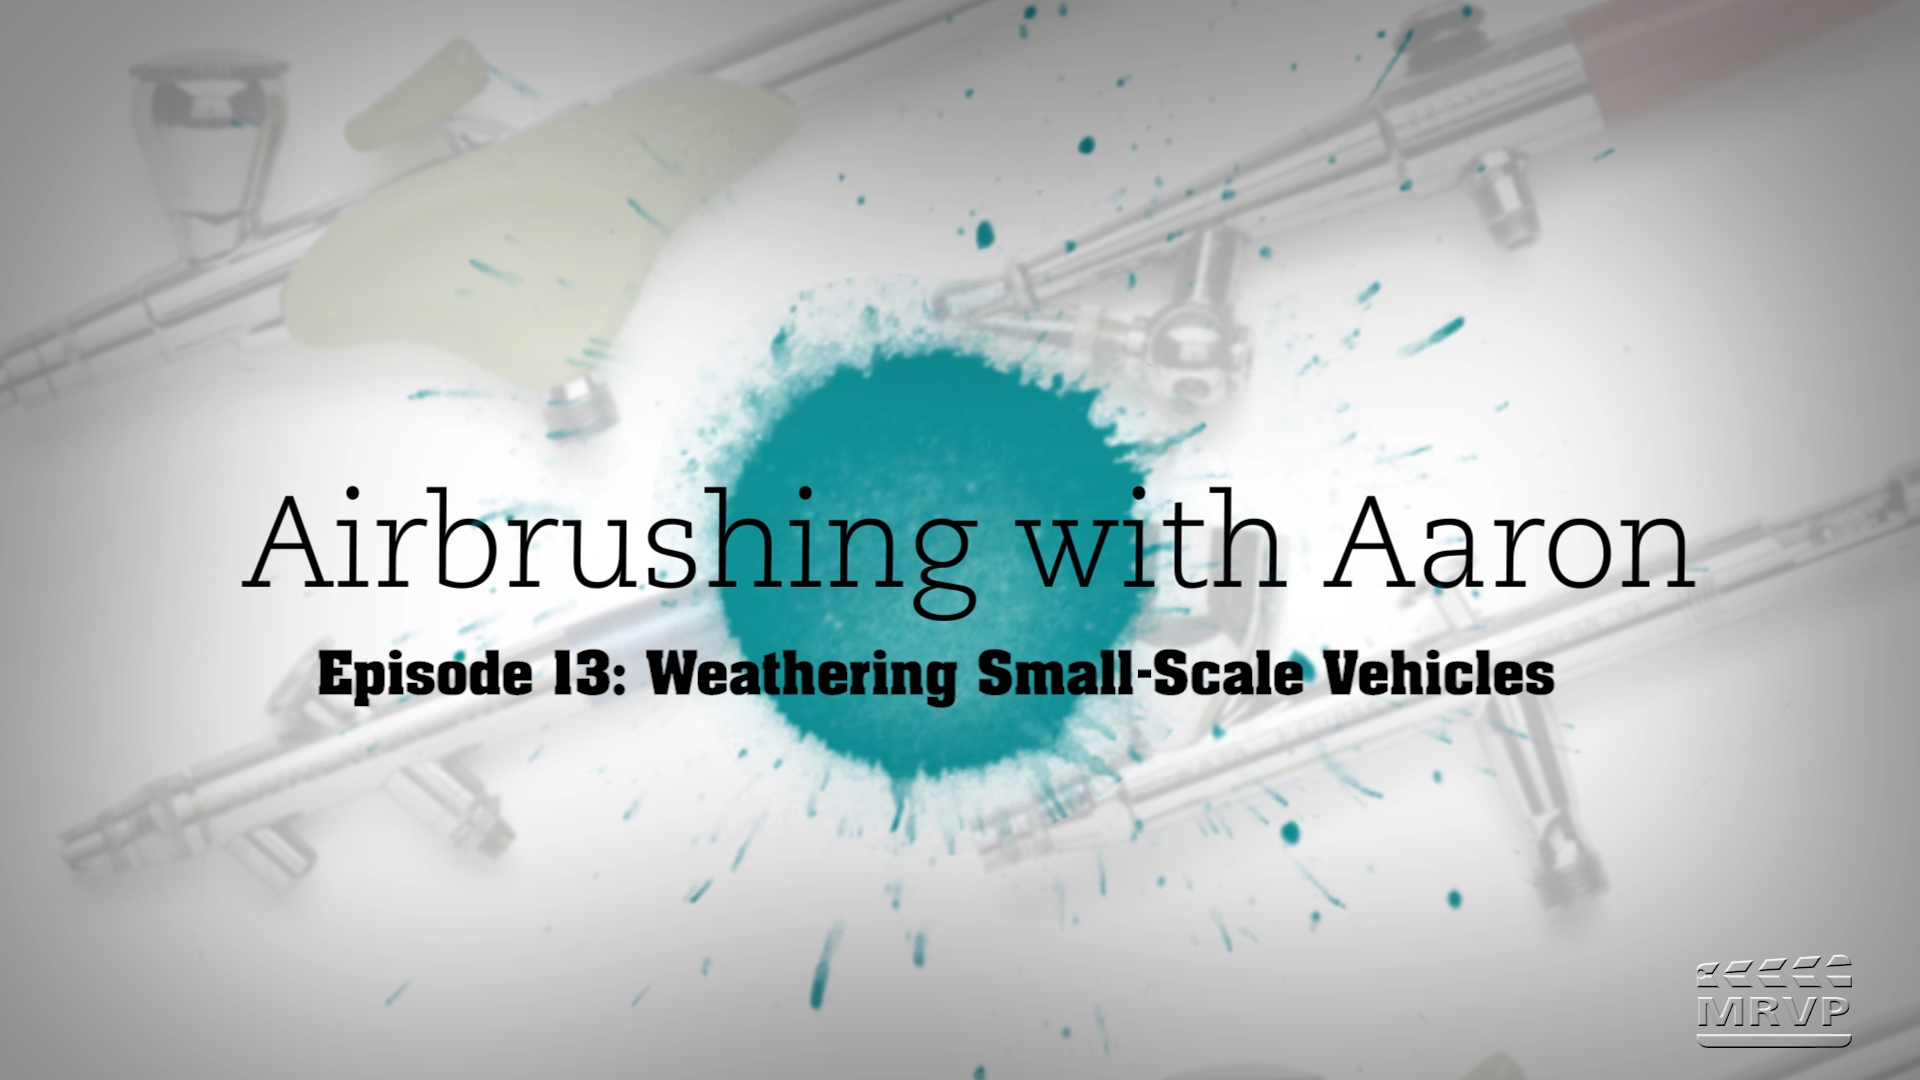 How-to Library: Airbrushing with Aaron, Episode 13, Weathering small-scale vehicles